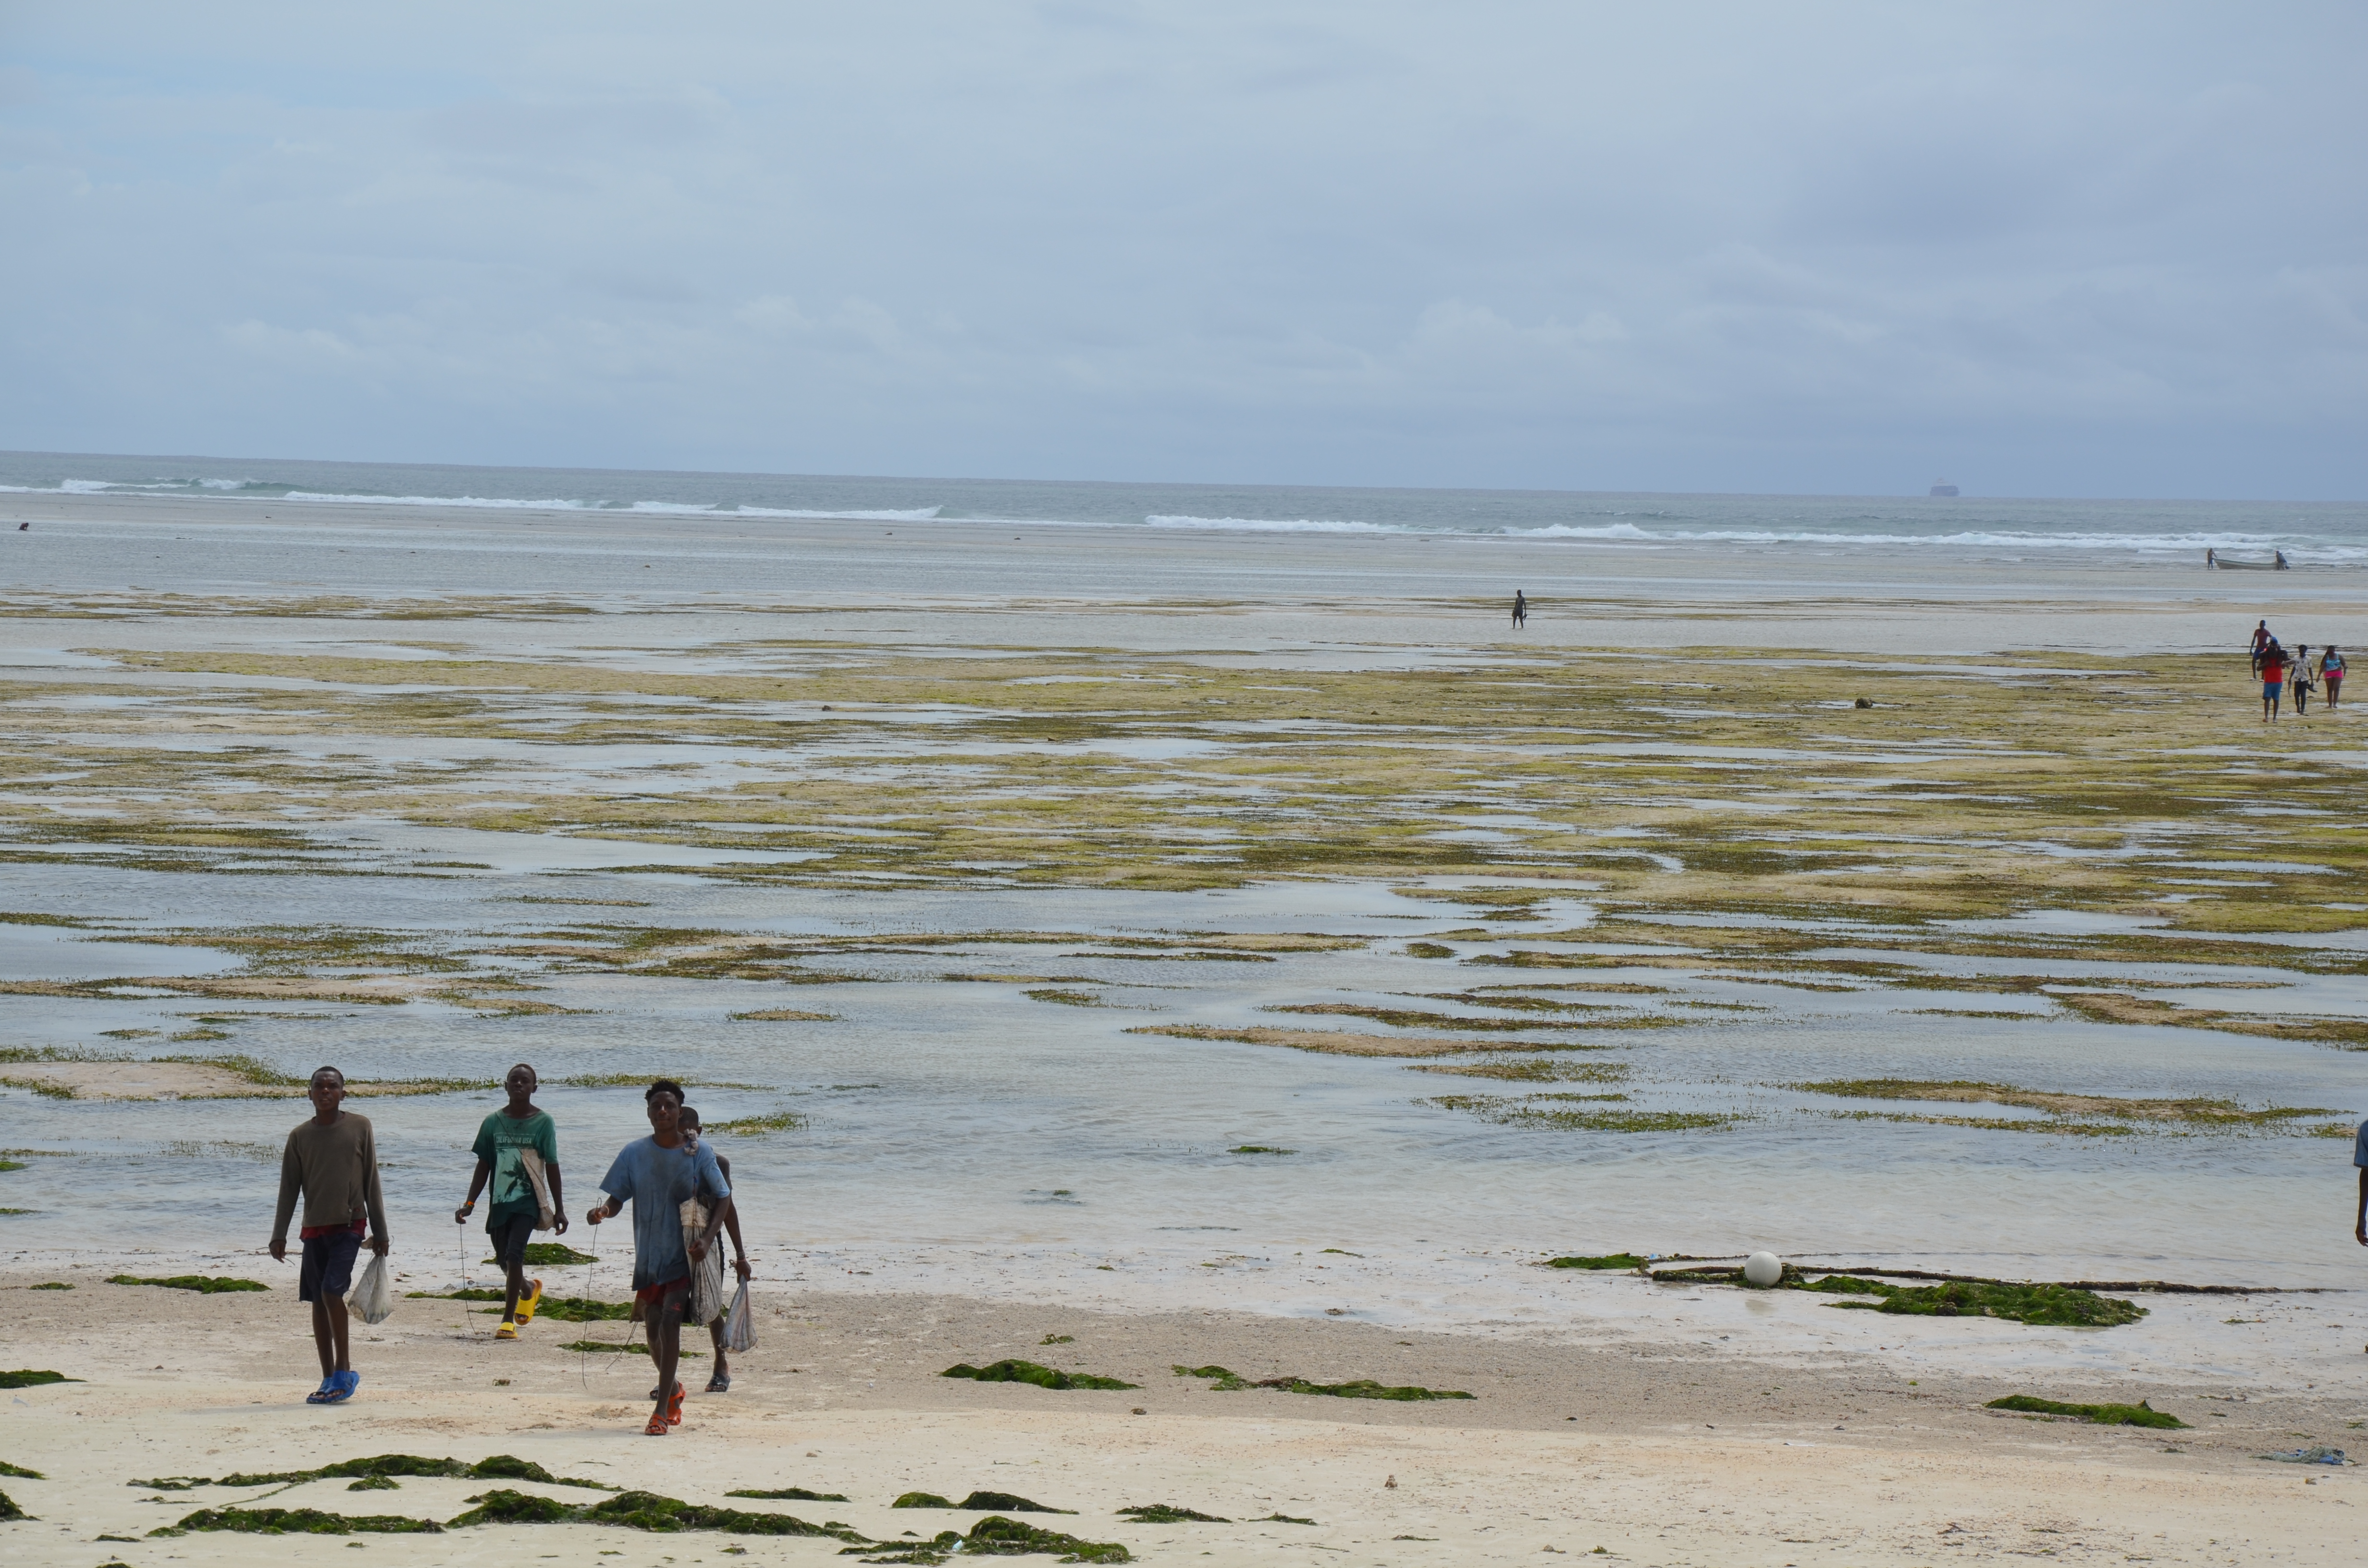 10 kilometres north of Mombasa, as the tide comes in the coral reefs, dozens of fishers bring in their catch.